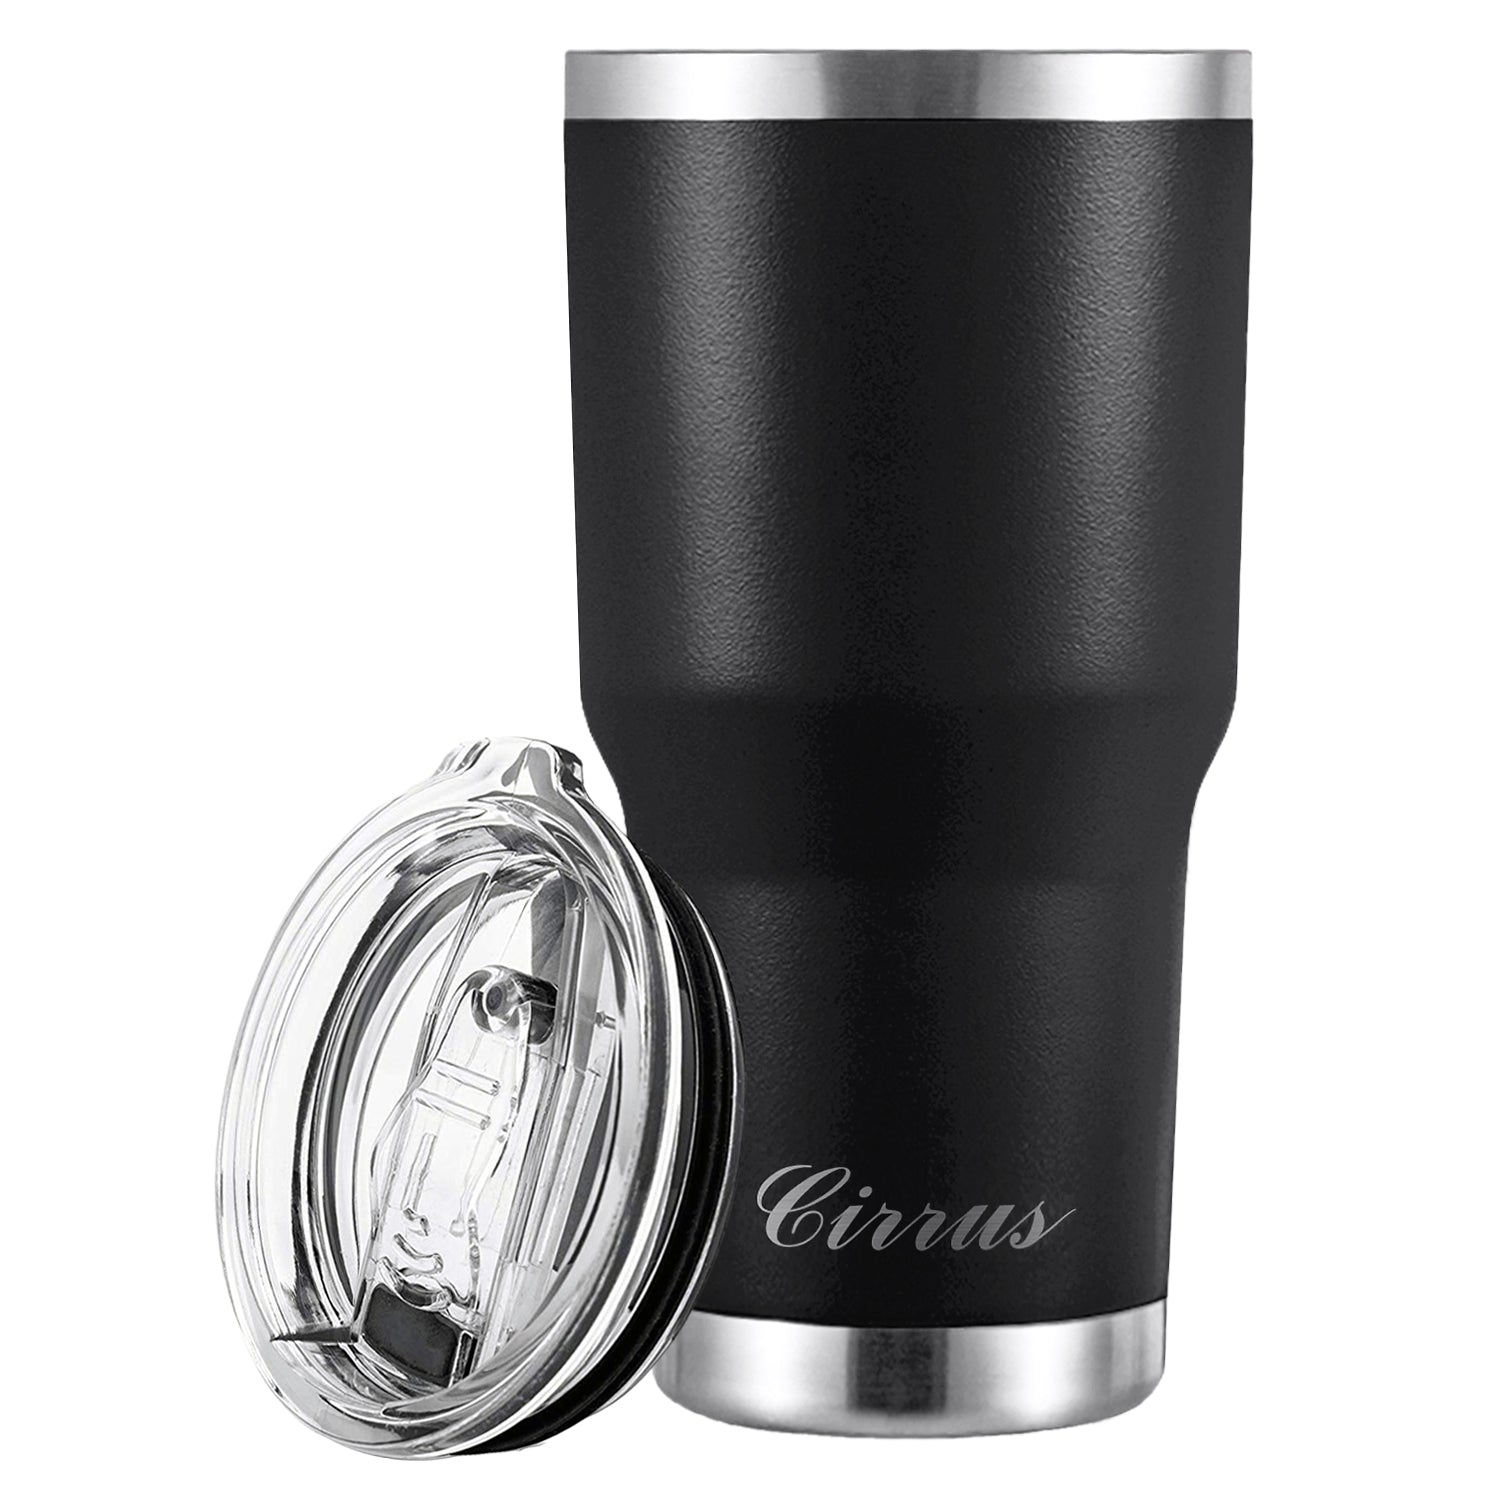 Crisky 30oz You are Awesome Vacuum Insulated Tumbler for Men Inspirati